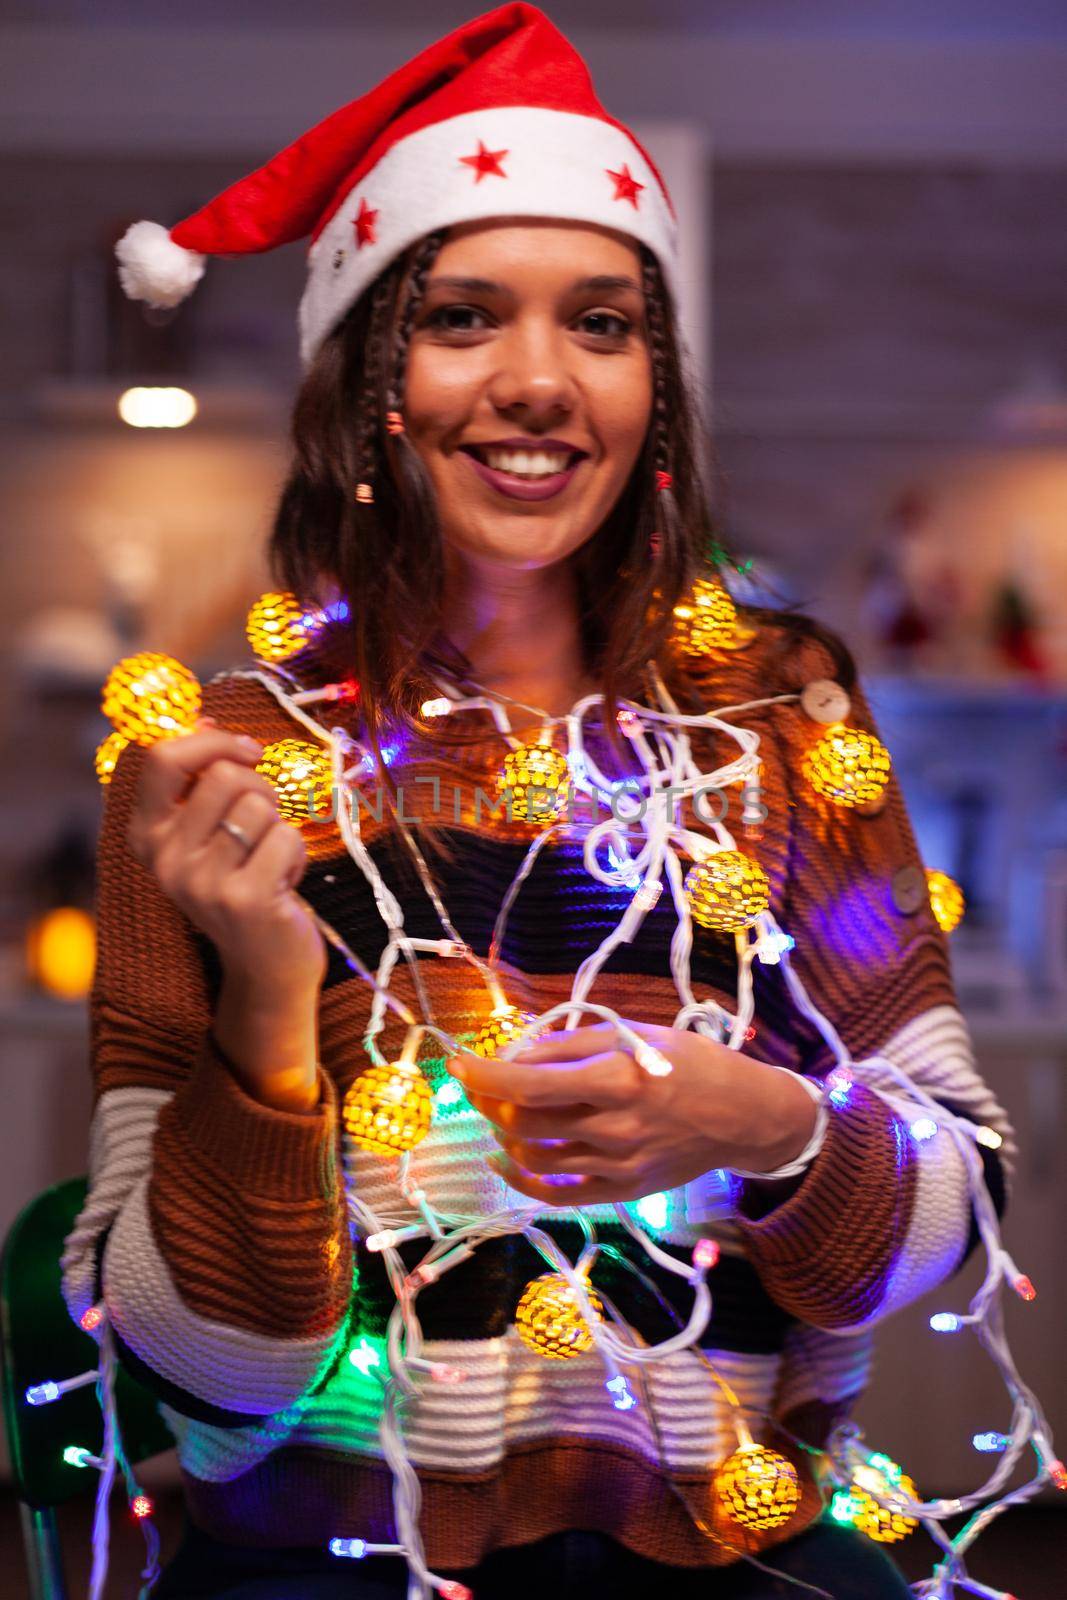 Cheerful adult tangled in christmas string lights by DCStudio